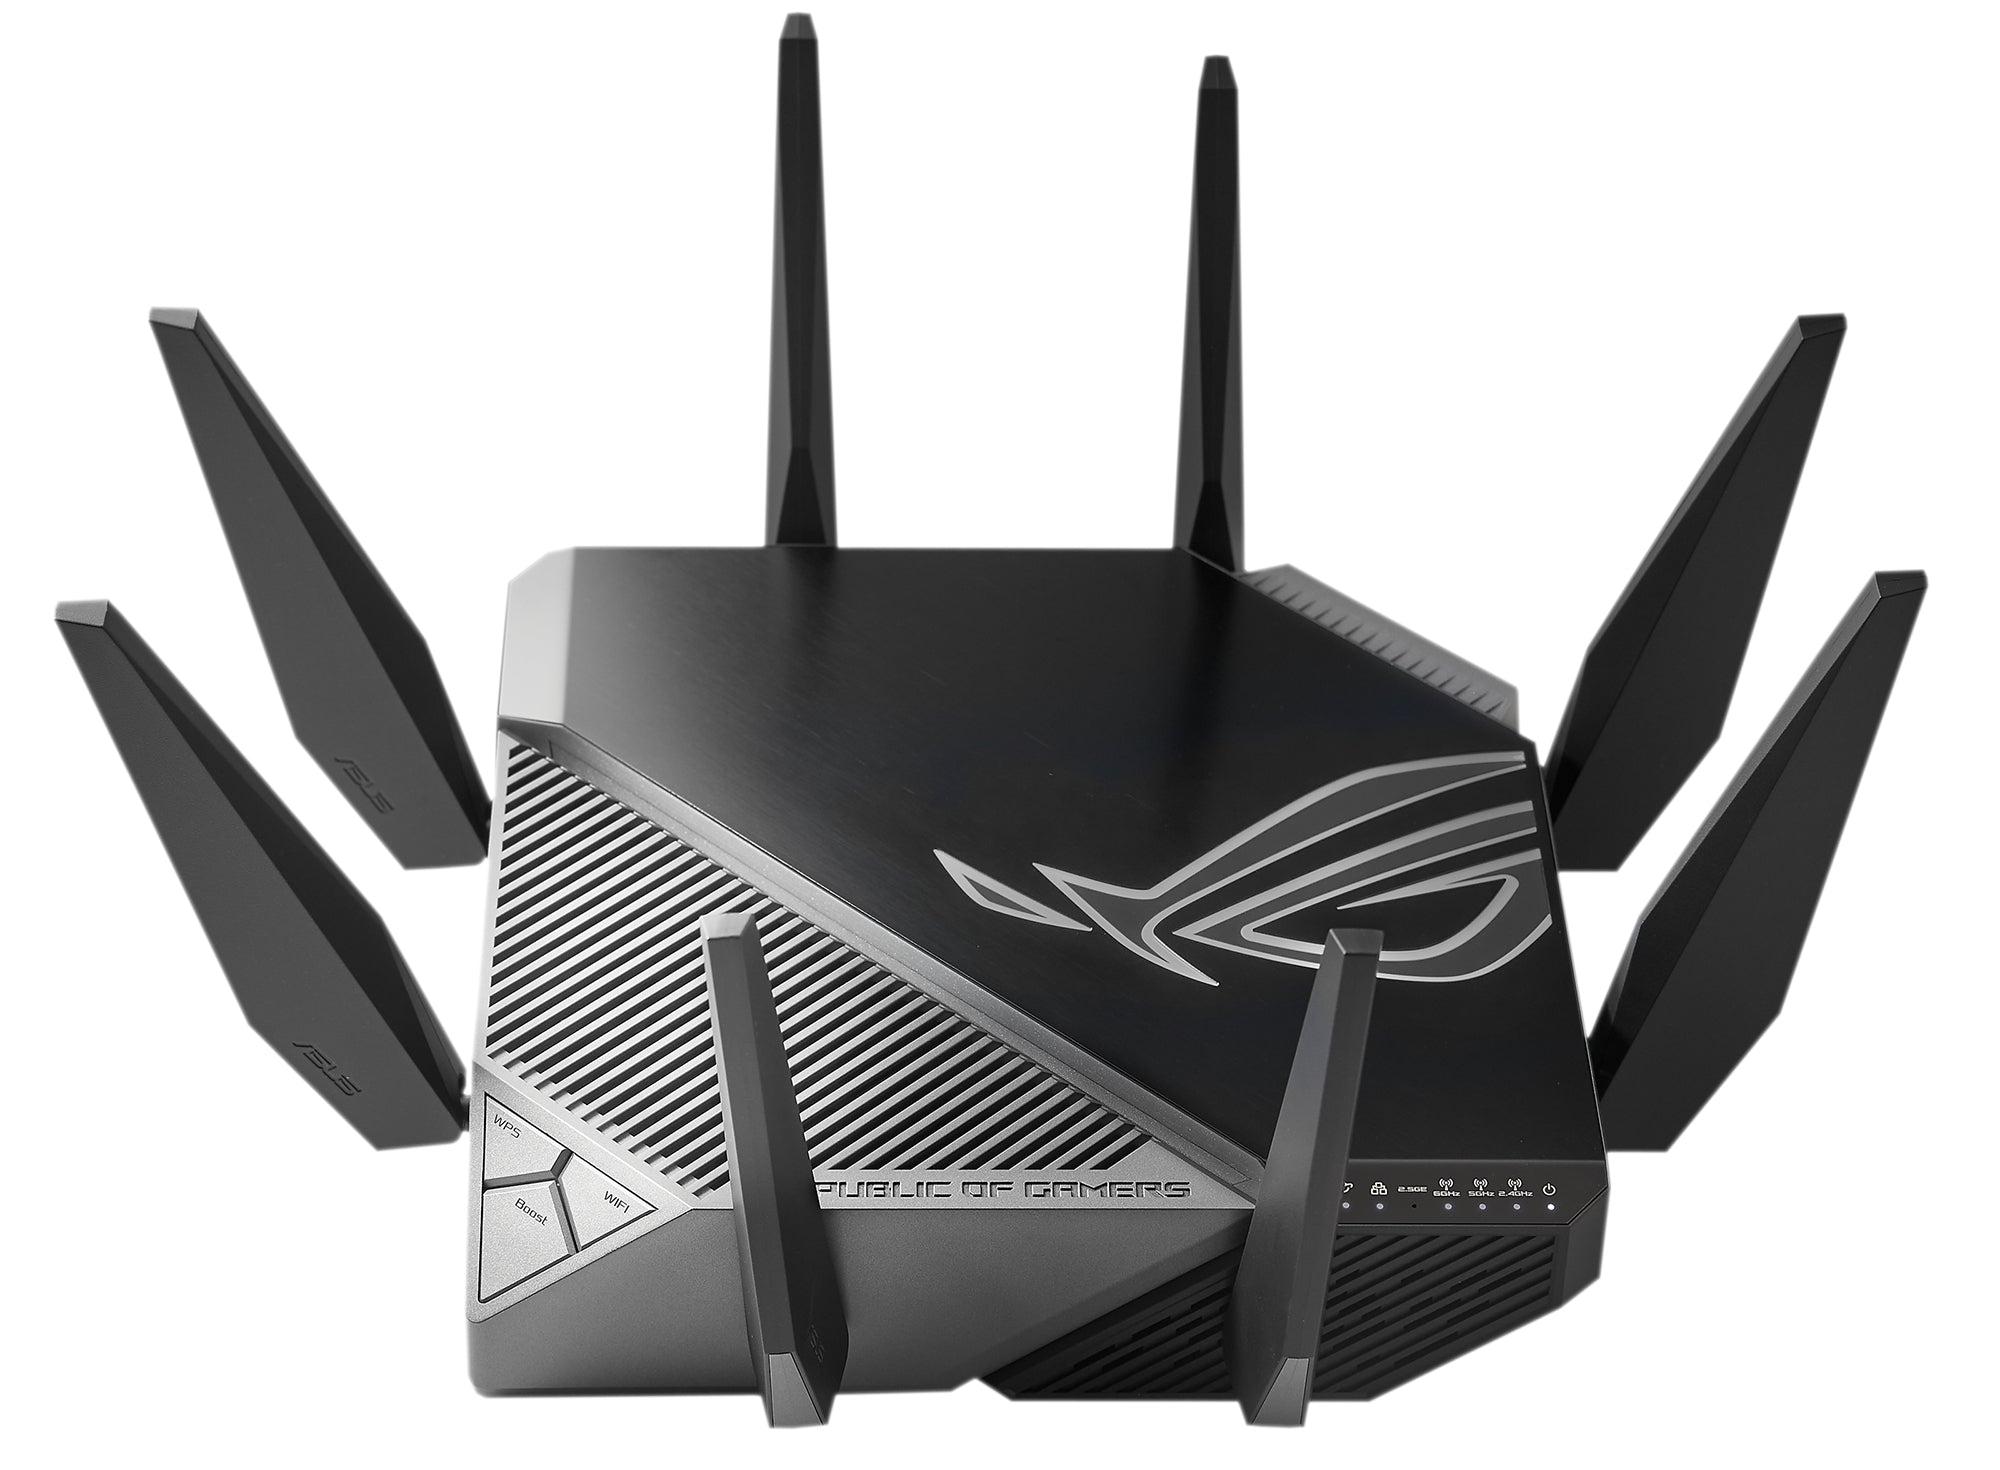 Product ASUS GT-AXE11000 wireless router Gigabit Ethernet Tri-band (2.4 GHz / 5 GHz / 6 GHz) Black - EuroBusiness Products UK image